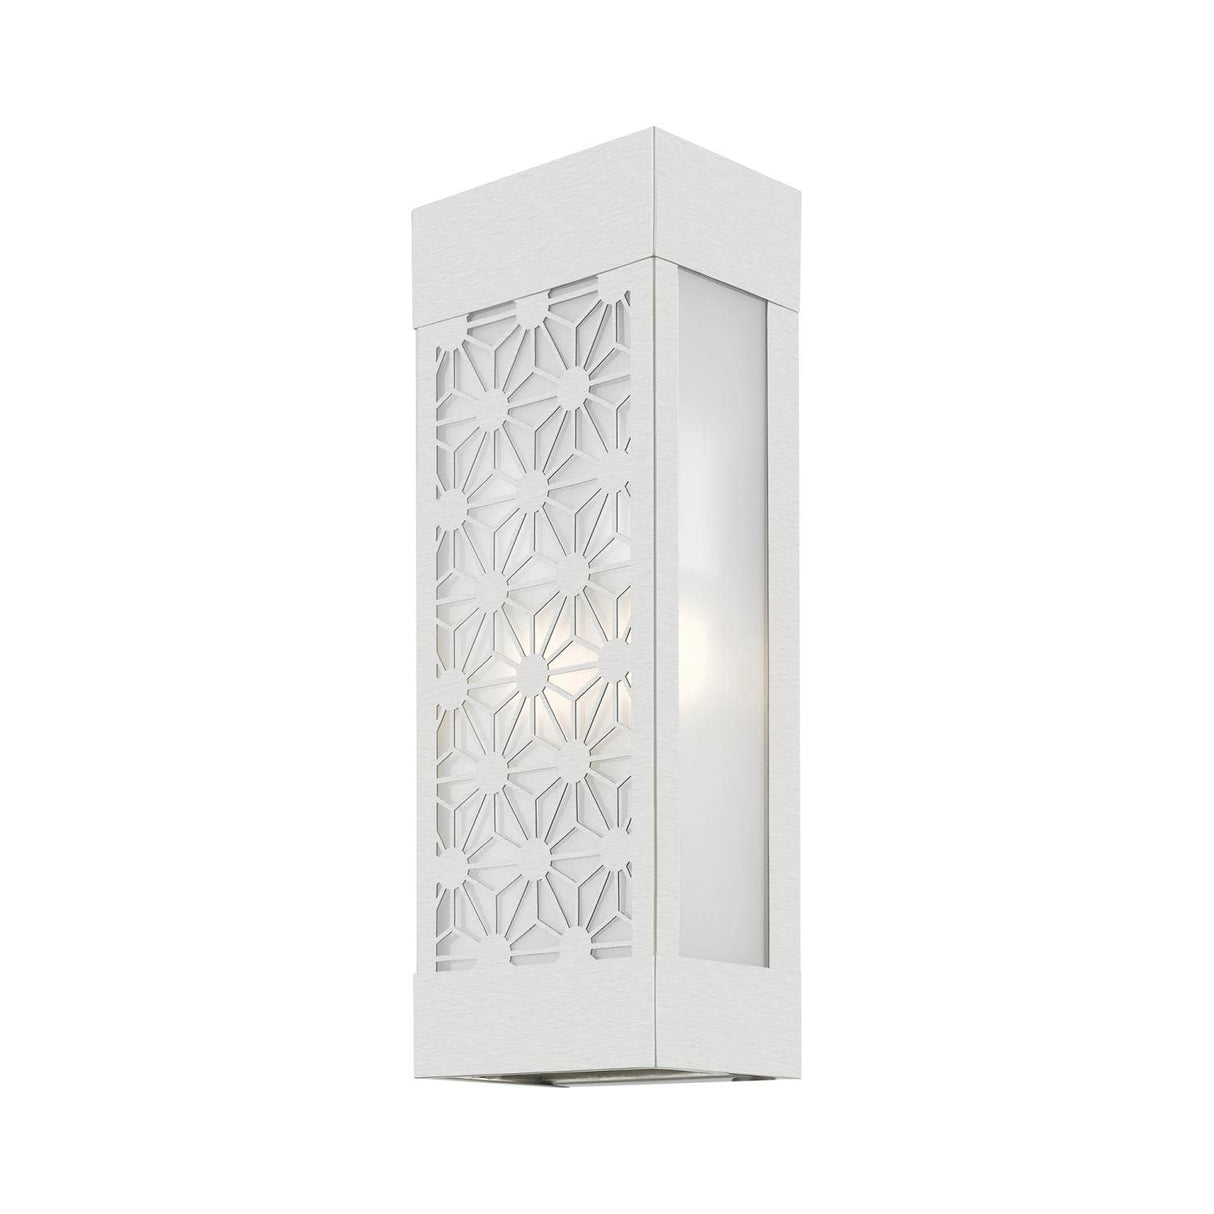 Livex Lighting 24322-91 Berkeley - 2 Light Outdoor ADA Wall Sconce in Nordic Style-17 Inches Tall and 6 Inches Wide, Finish Color: Brushed Nickel